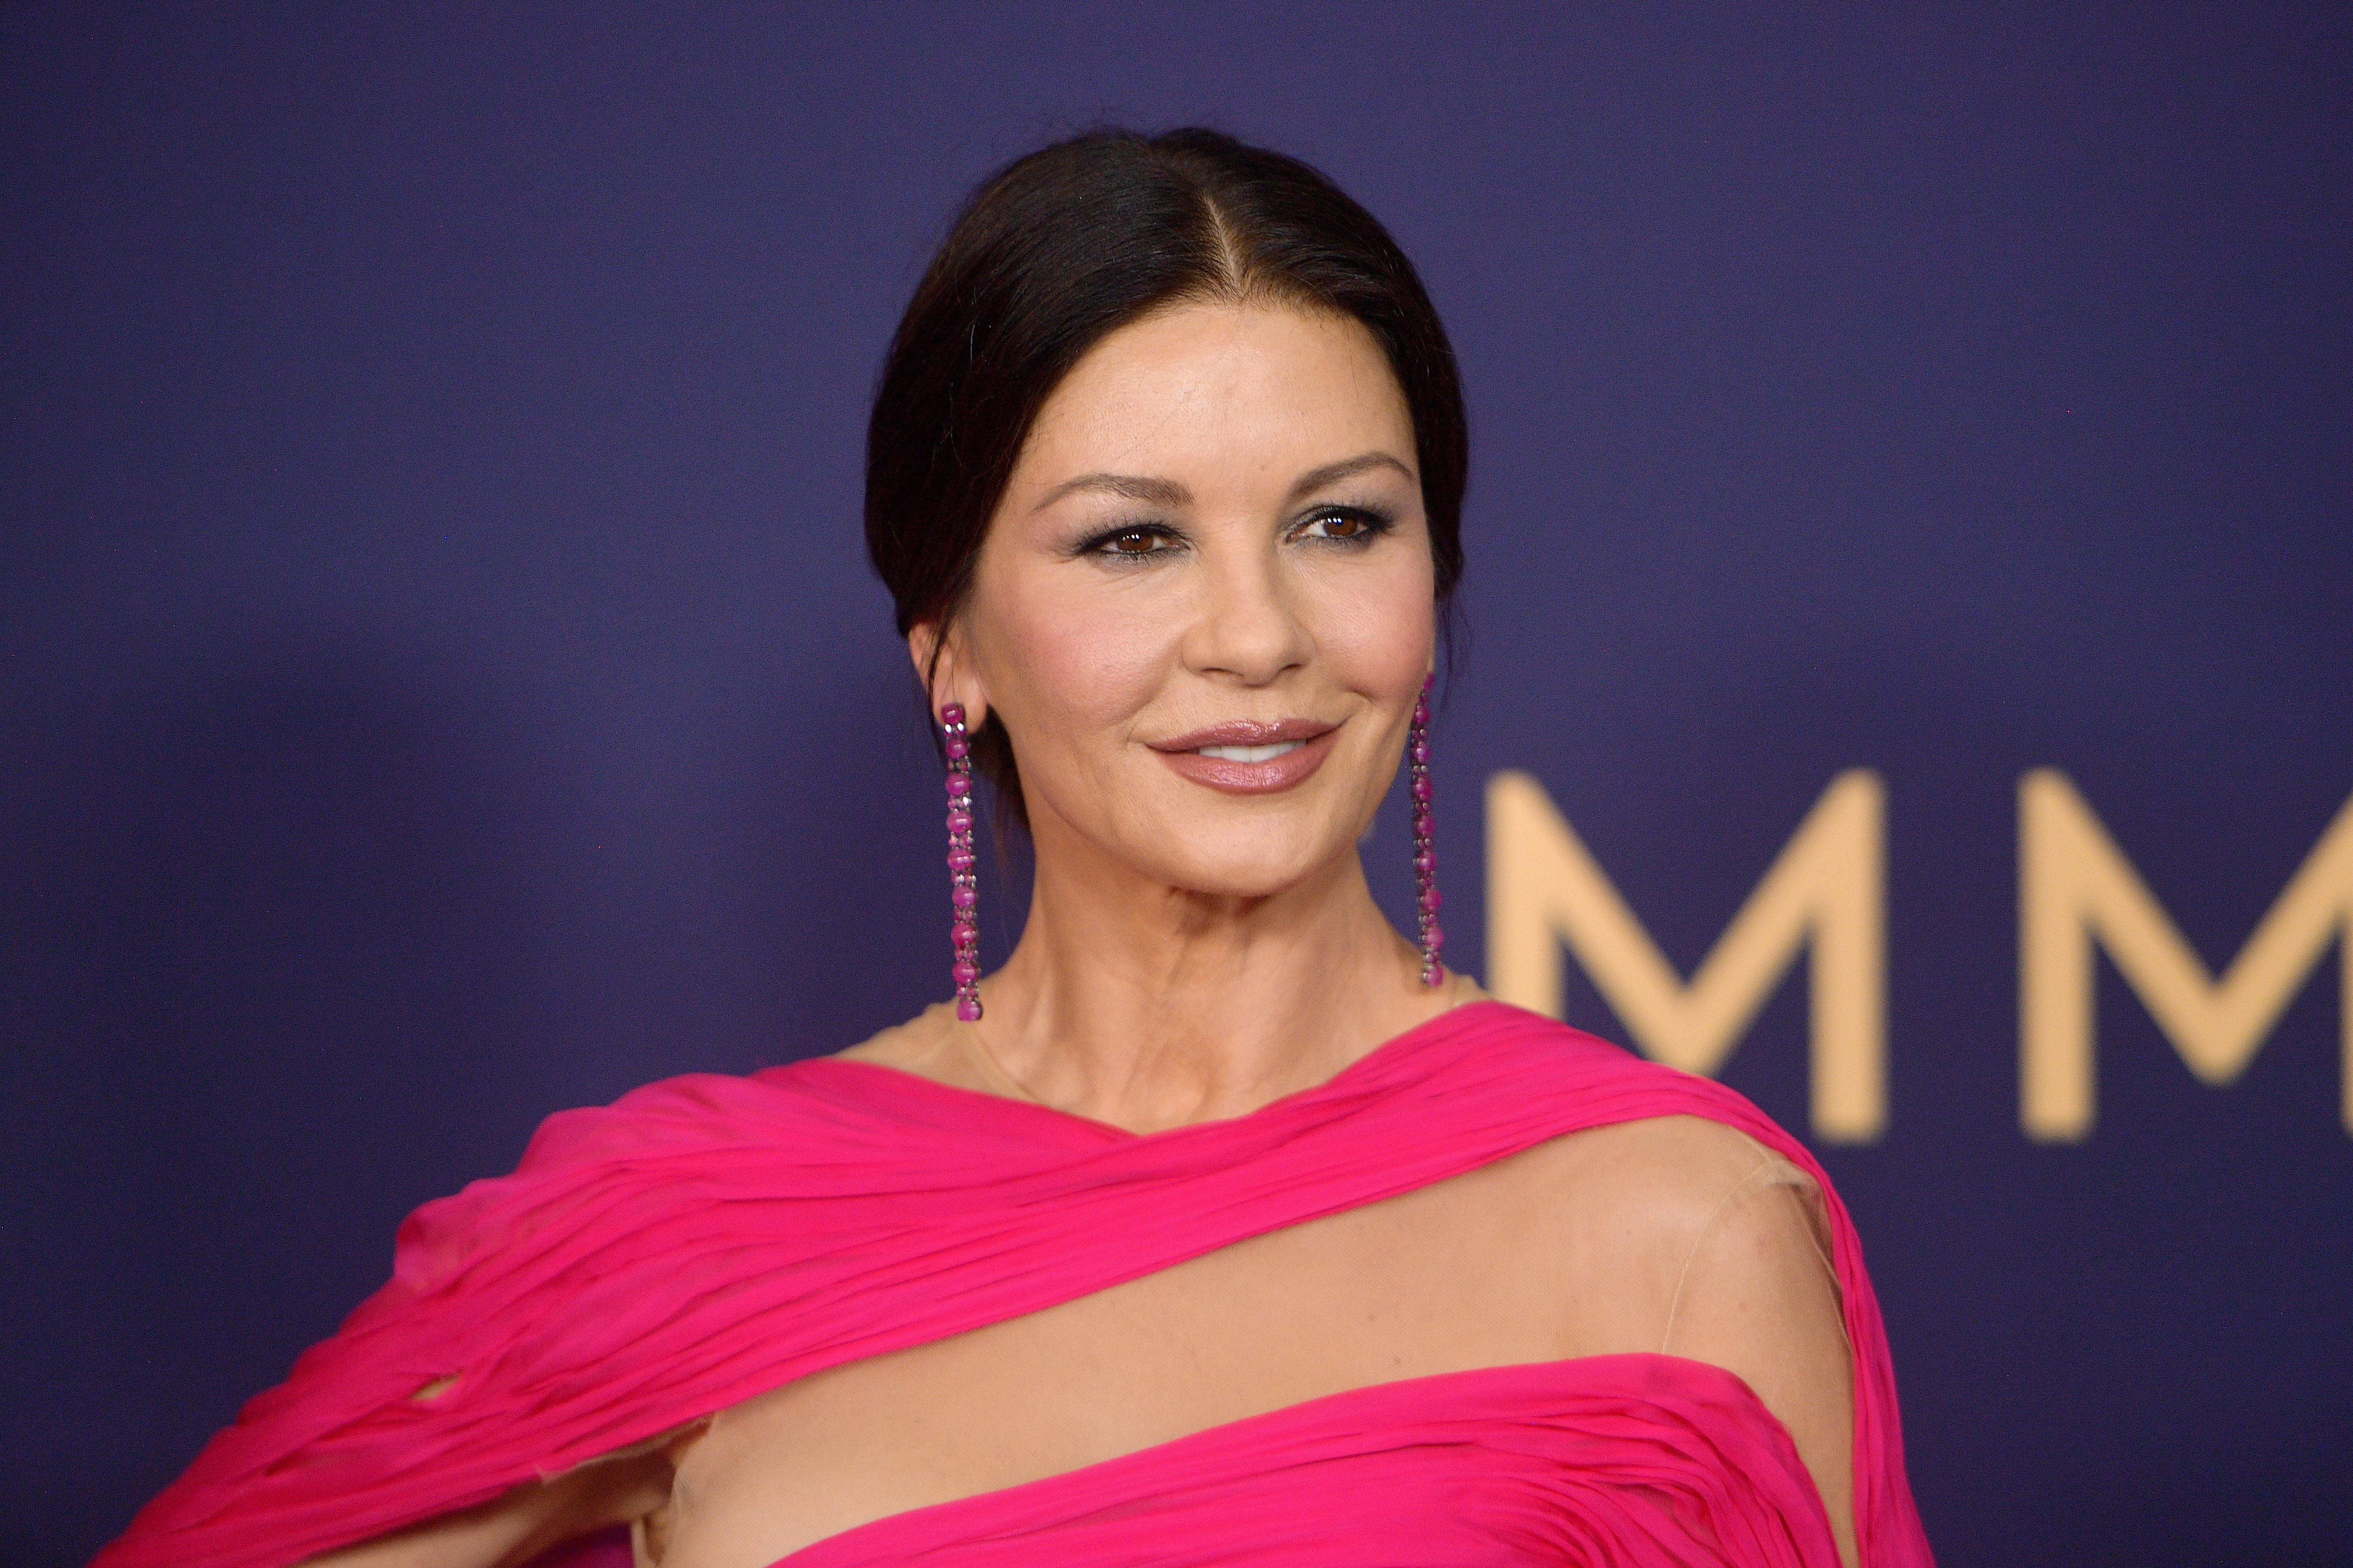 Catherine Zeta-Jones attends the 71st Emmy Awards at Microsoft Theater on September 22, 2019, in Los Angeles, California. | Photo: Getty Images.